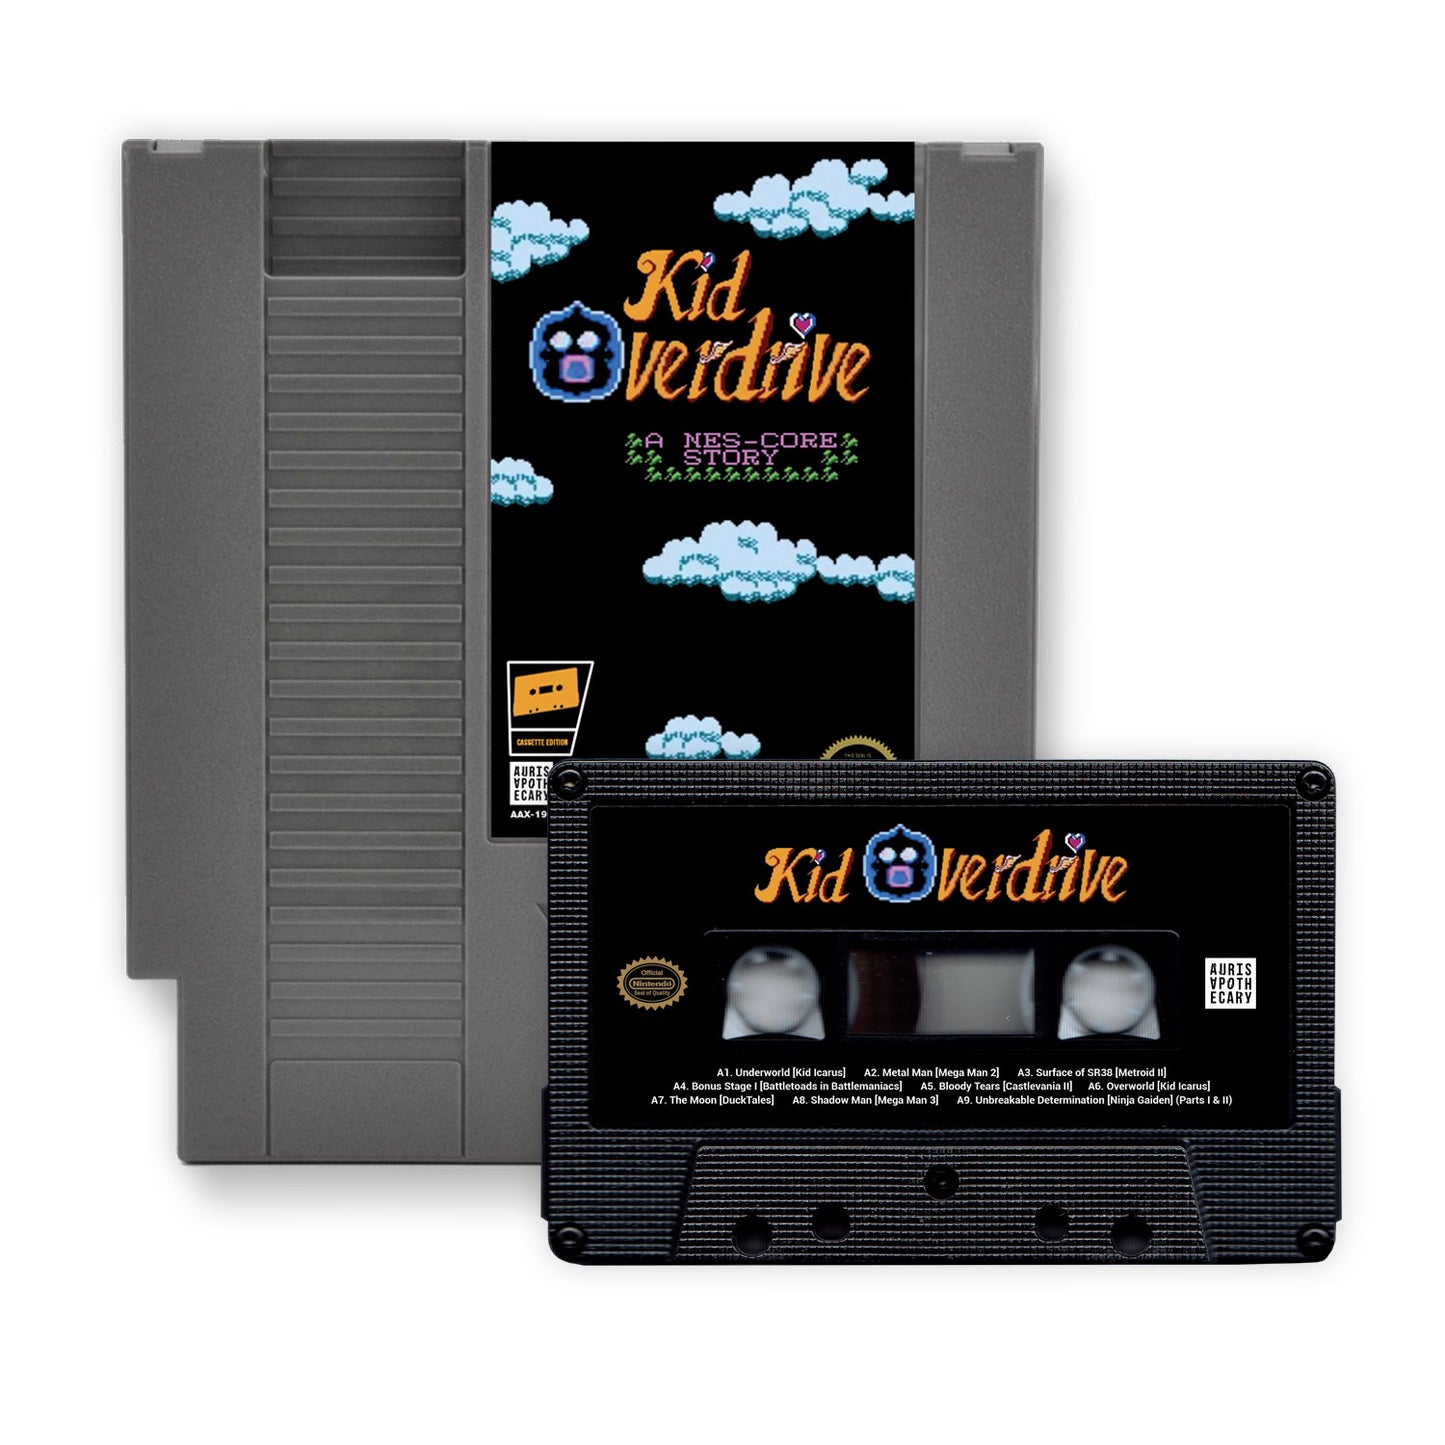 [SOLD OUT] KID OVERDRIVE "A NES-Core Story" Cassette Tape (inside a Nintendo cartridge!)